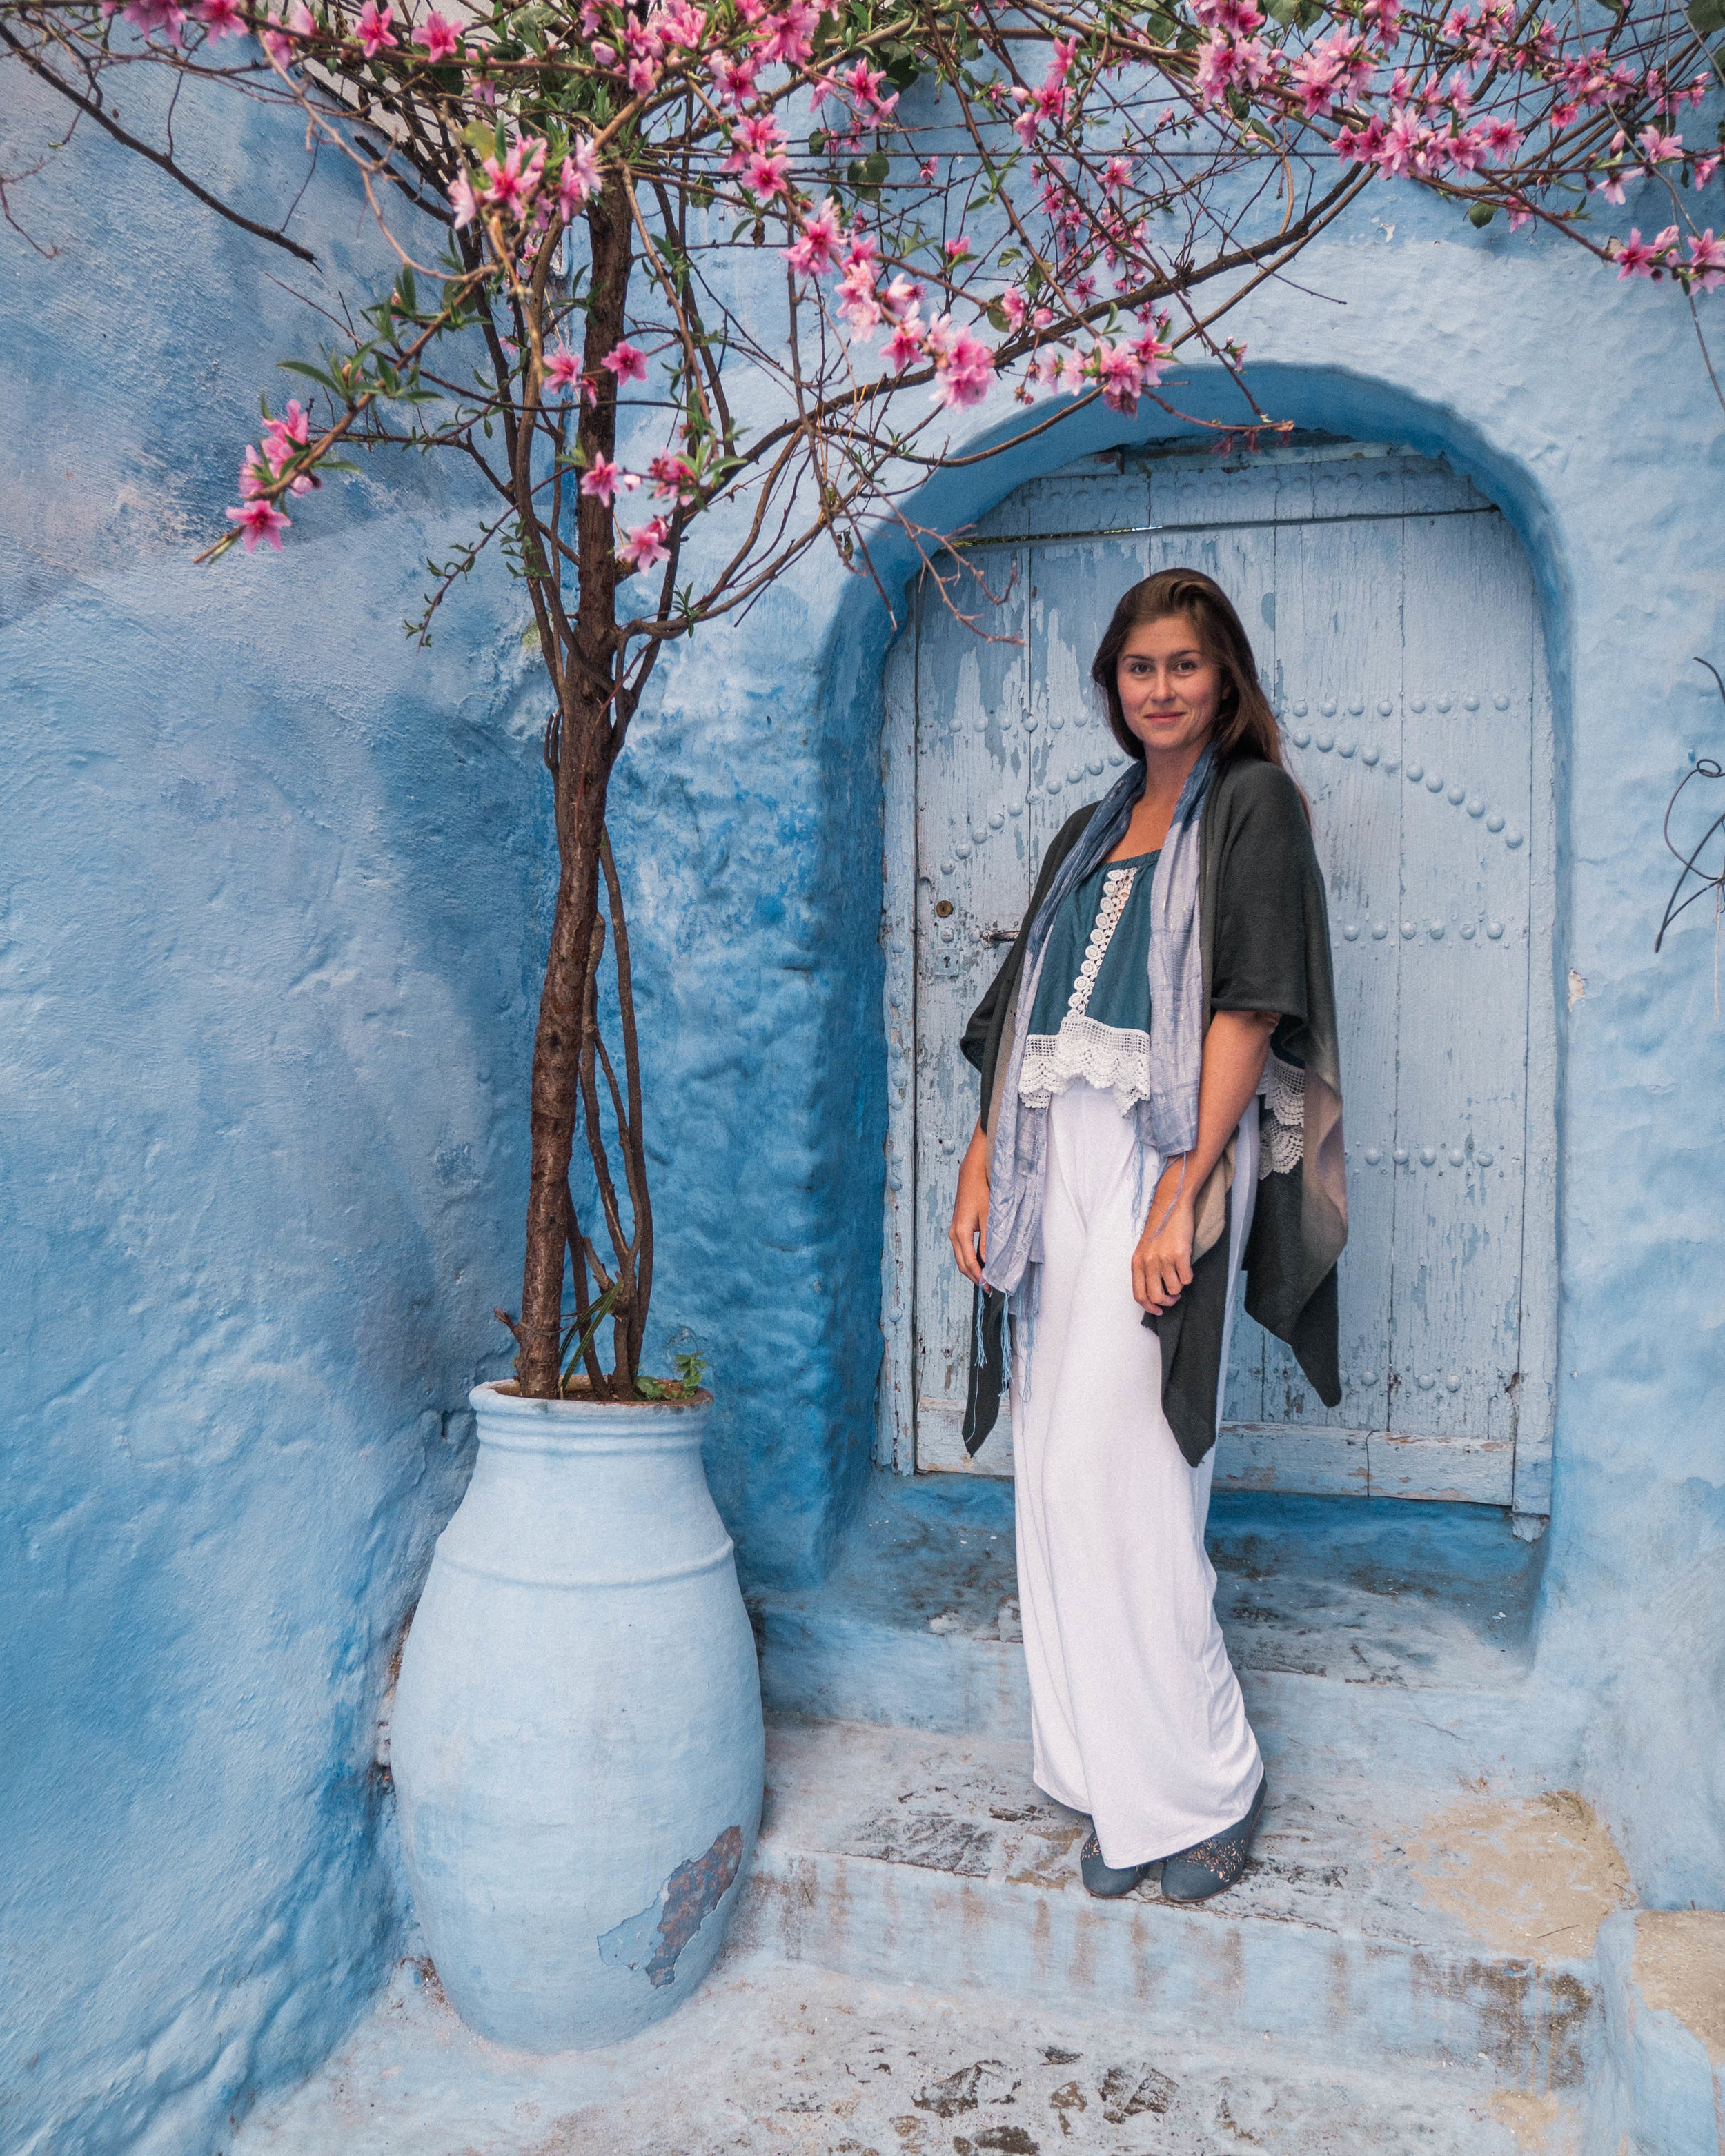 The most beautiful blue corner I could find - Chefchaouen - Morocco